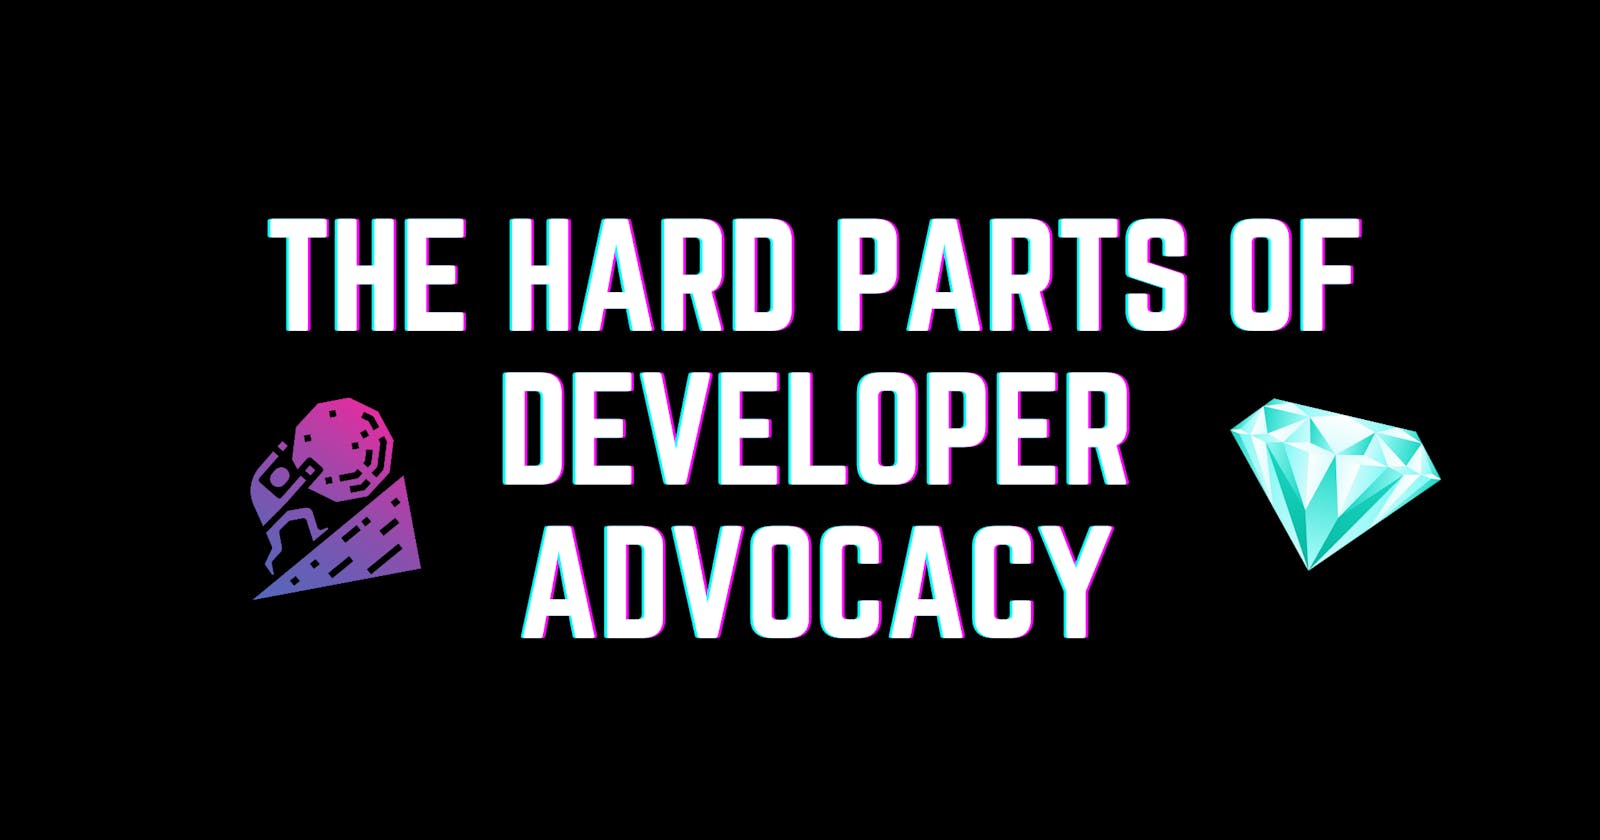 The Hard Parts of Developer Advocacy